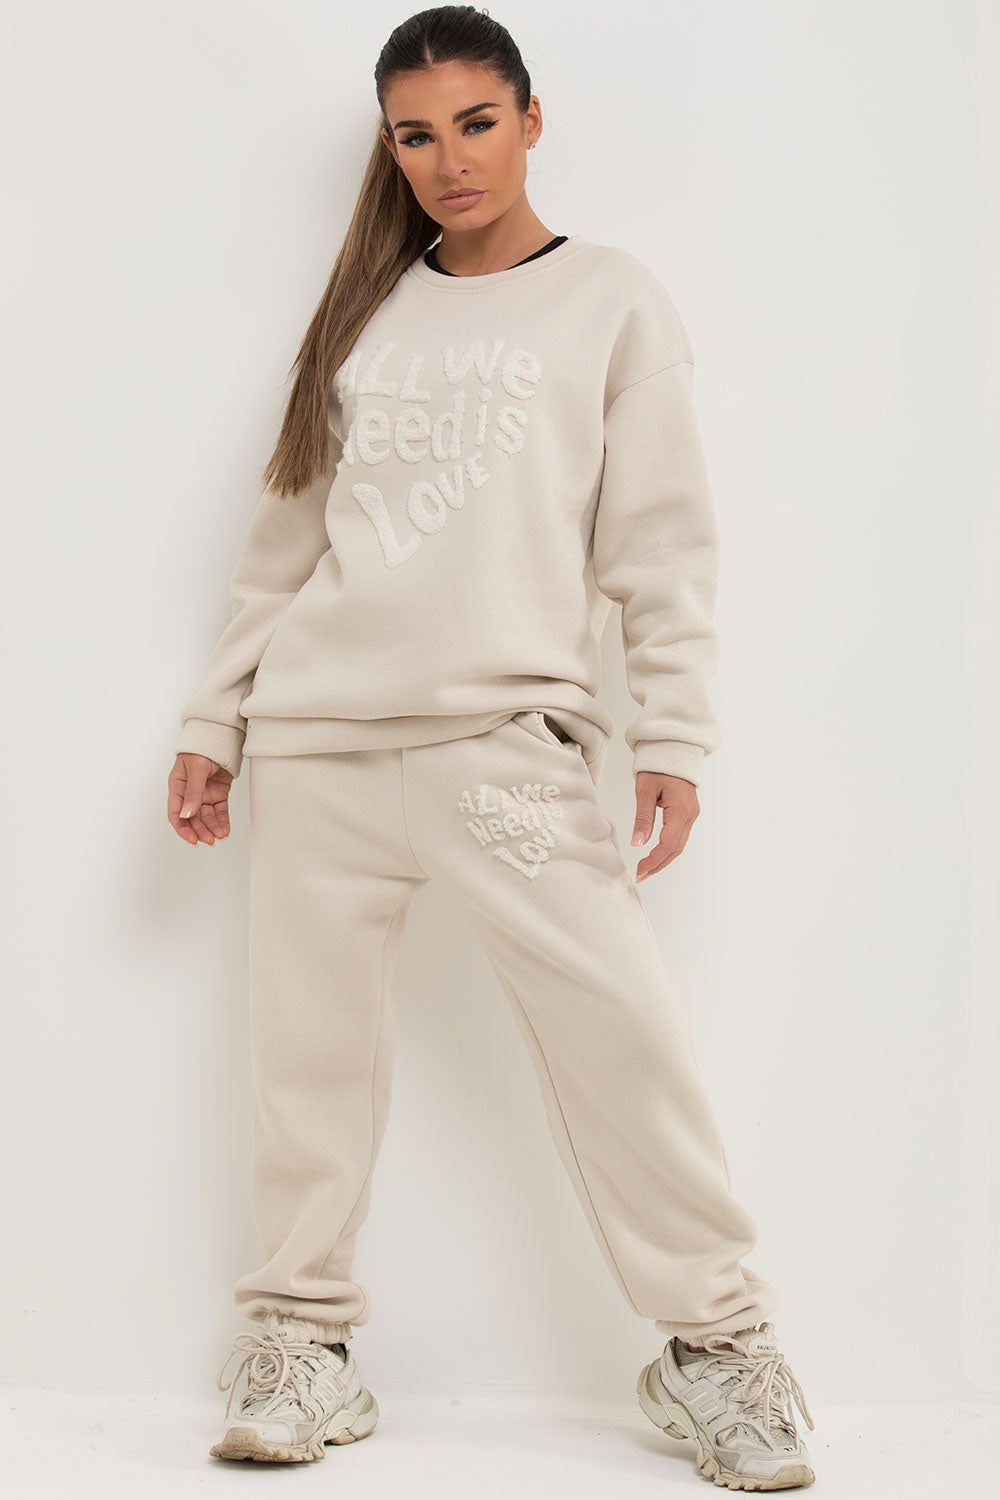 all we need is love loungewear co ord set